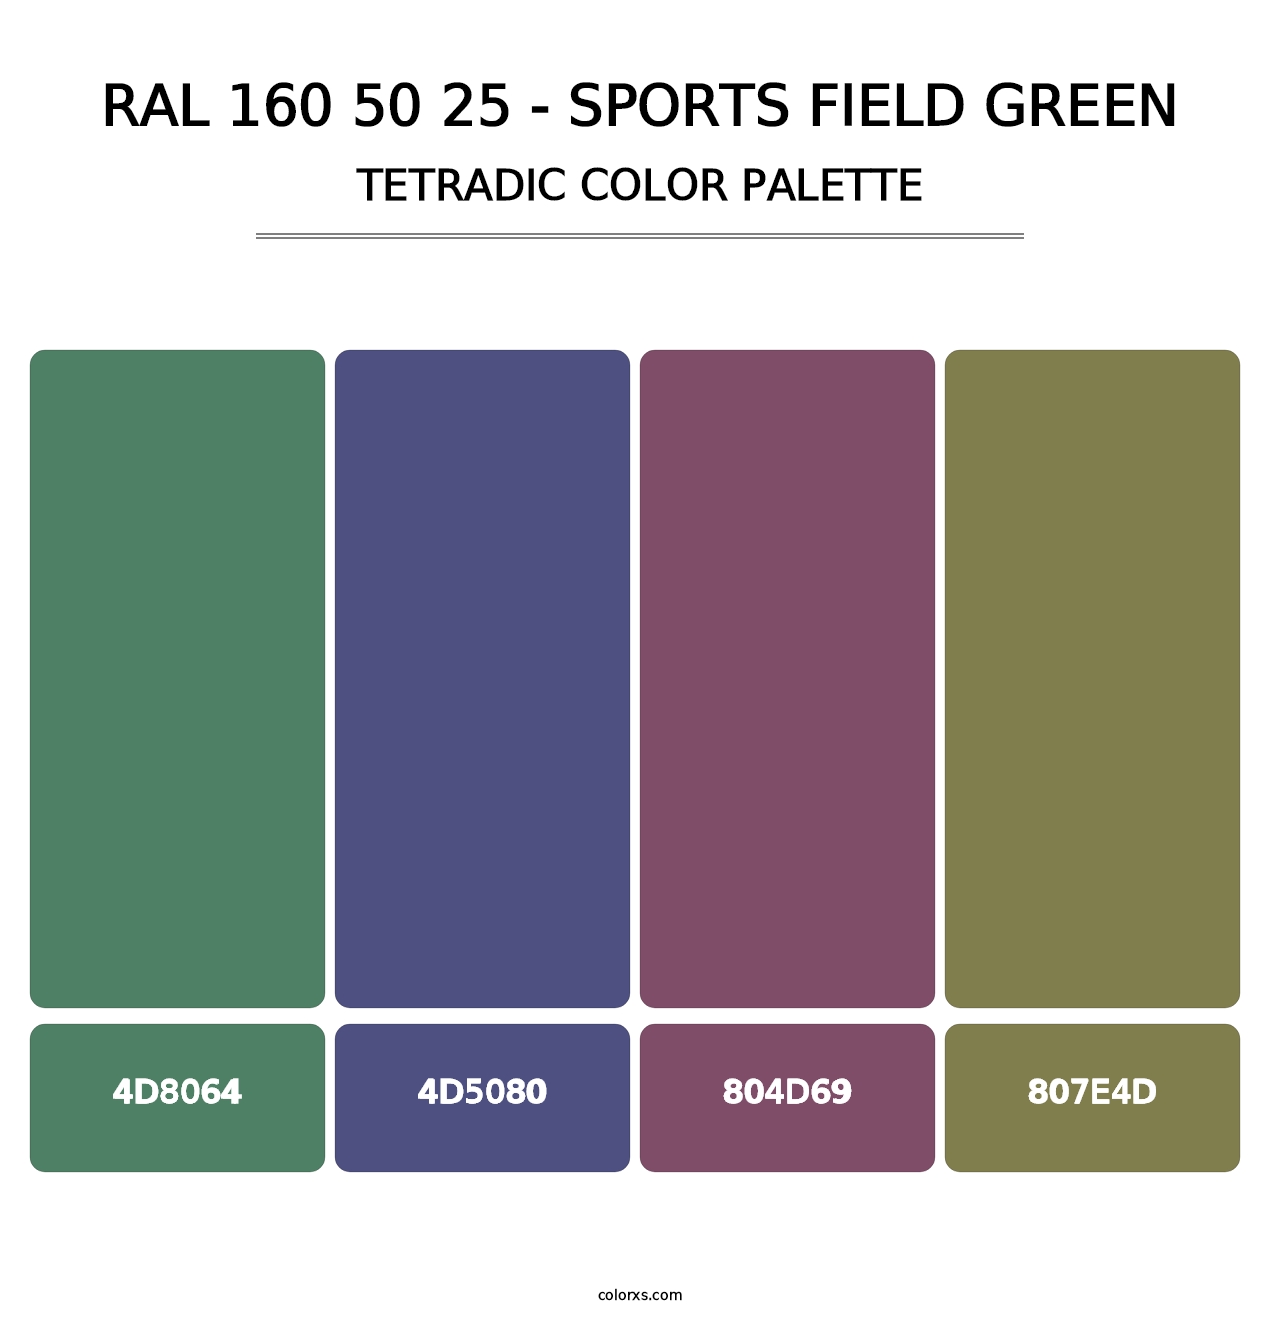 RAL 160 50 25 - Sports Field Green - Tetradic Color Palette